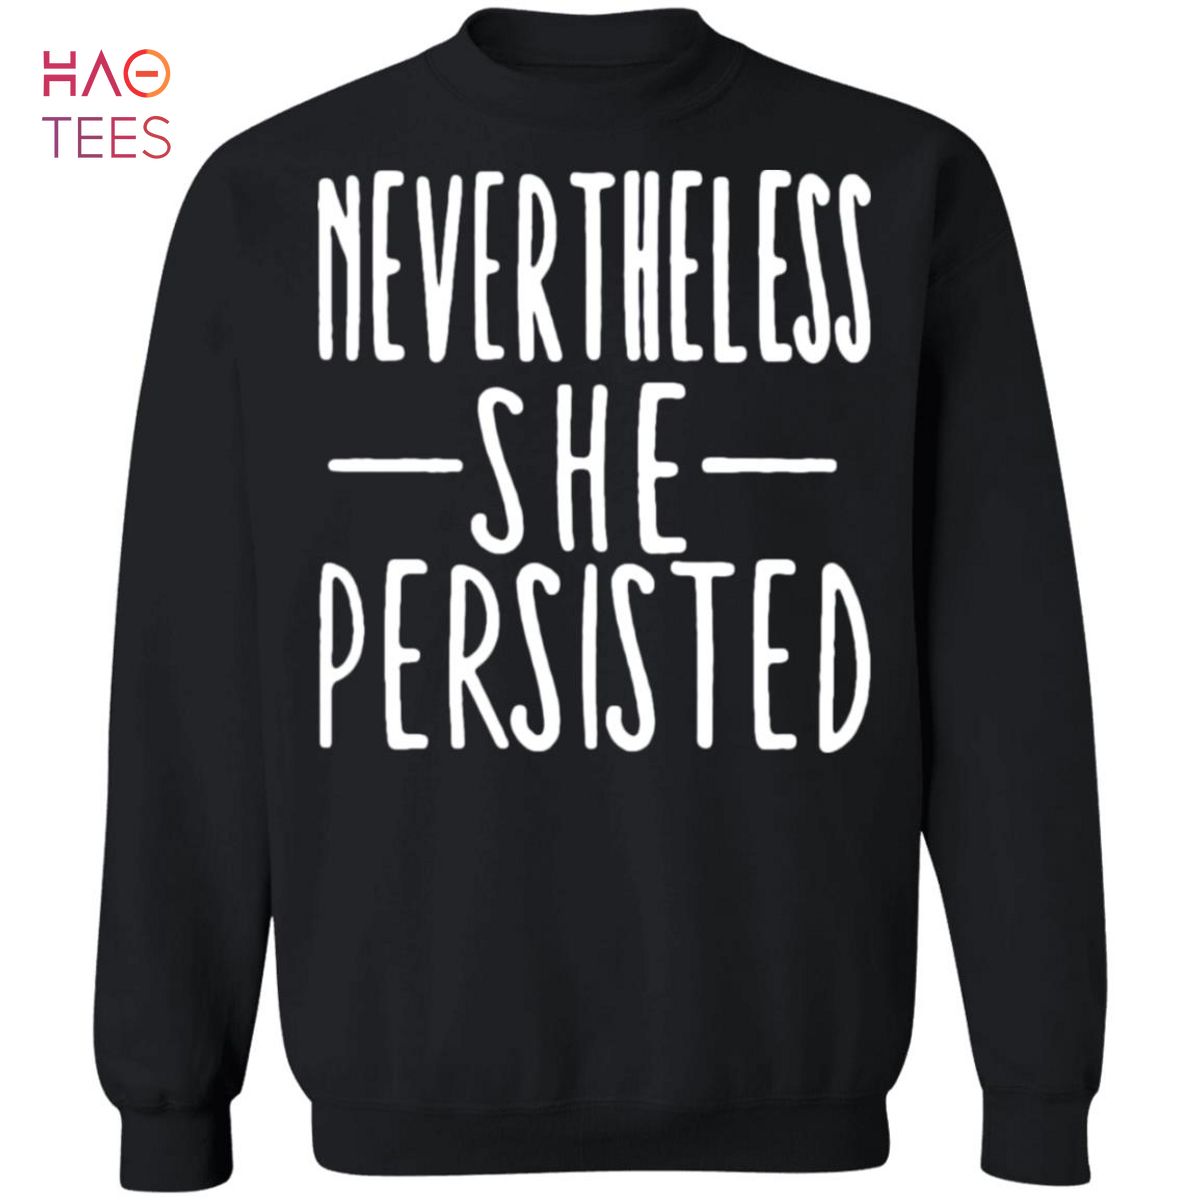 [NEW] Nevertheless She Persisted Sweater